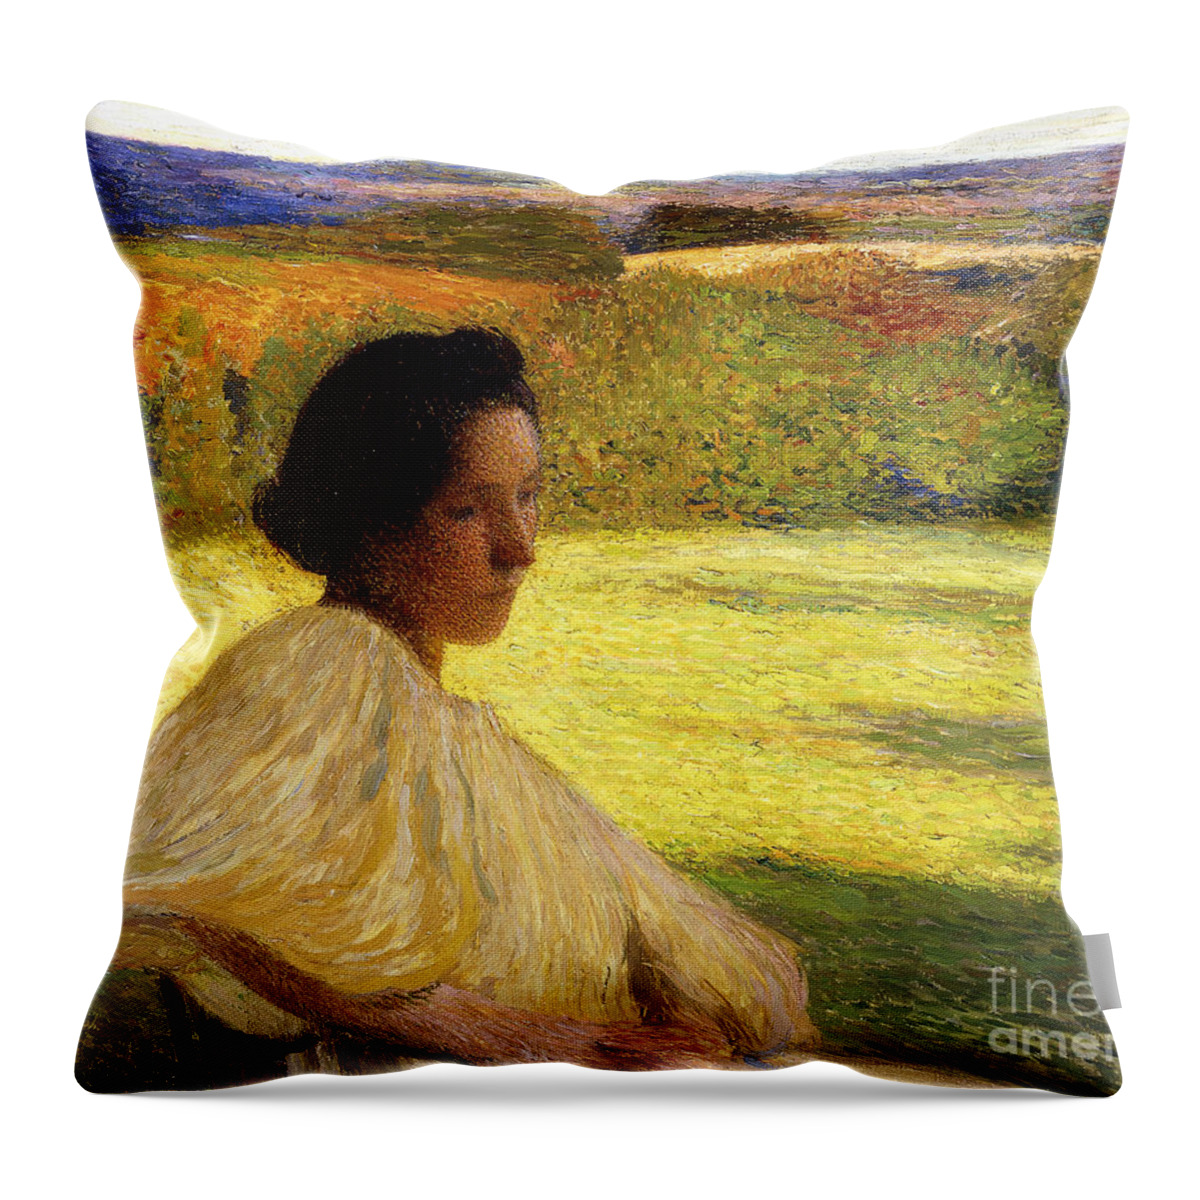 Calm Throw Pillow featuring the painting Meditation, 1896 by Henri Martin